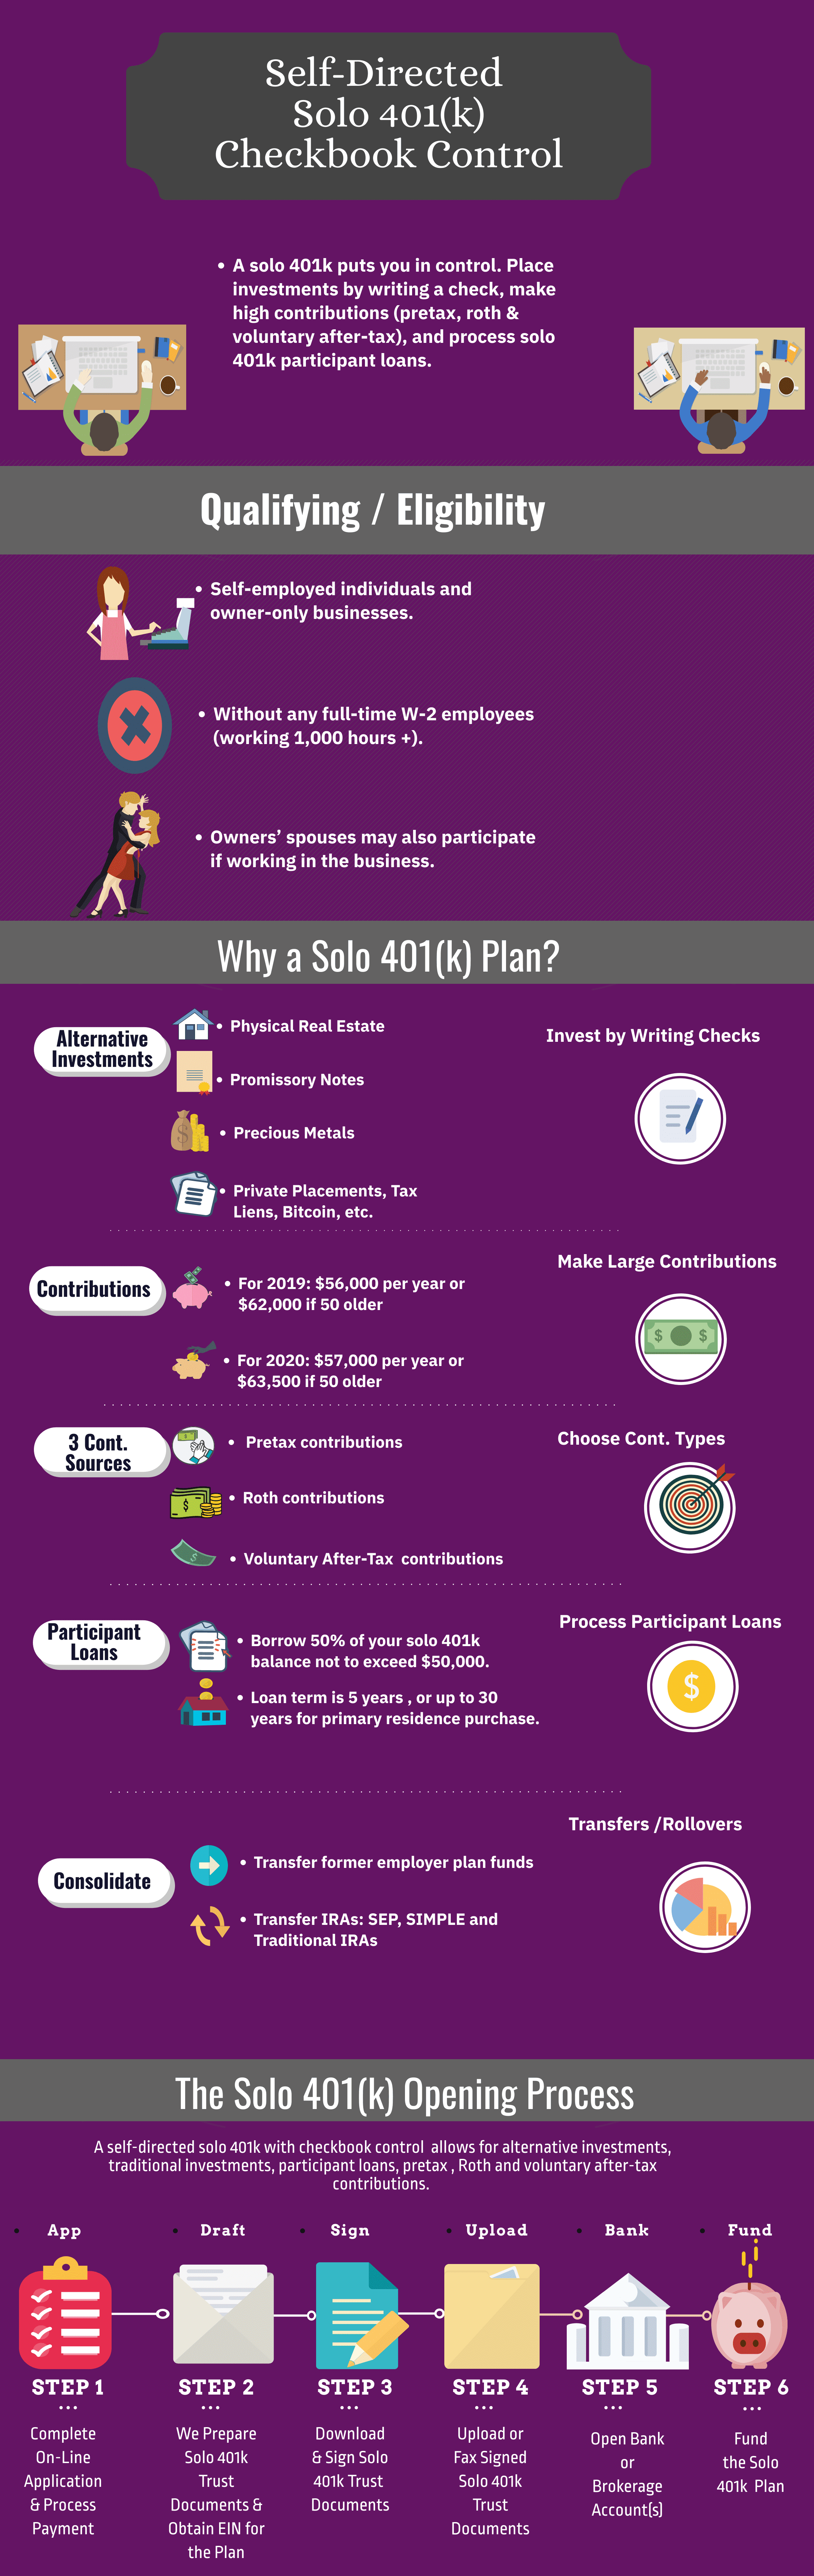 Solo 401k puts you in control.